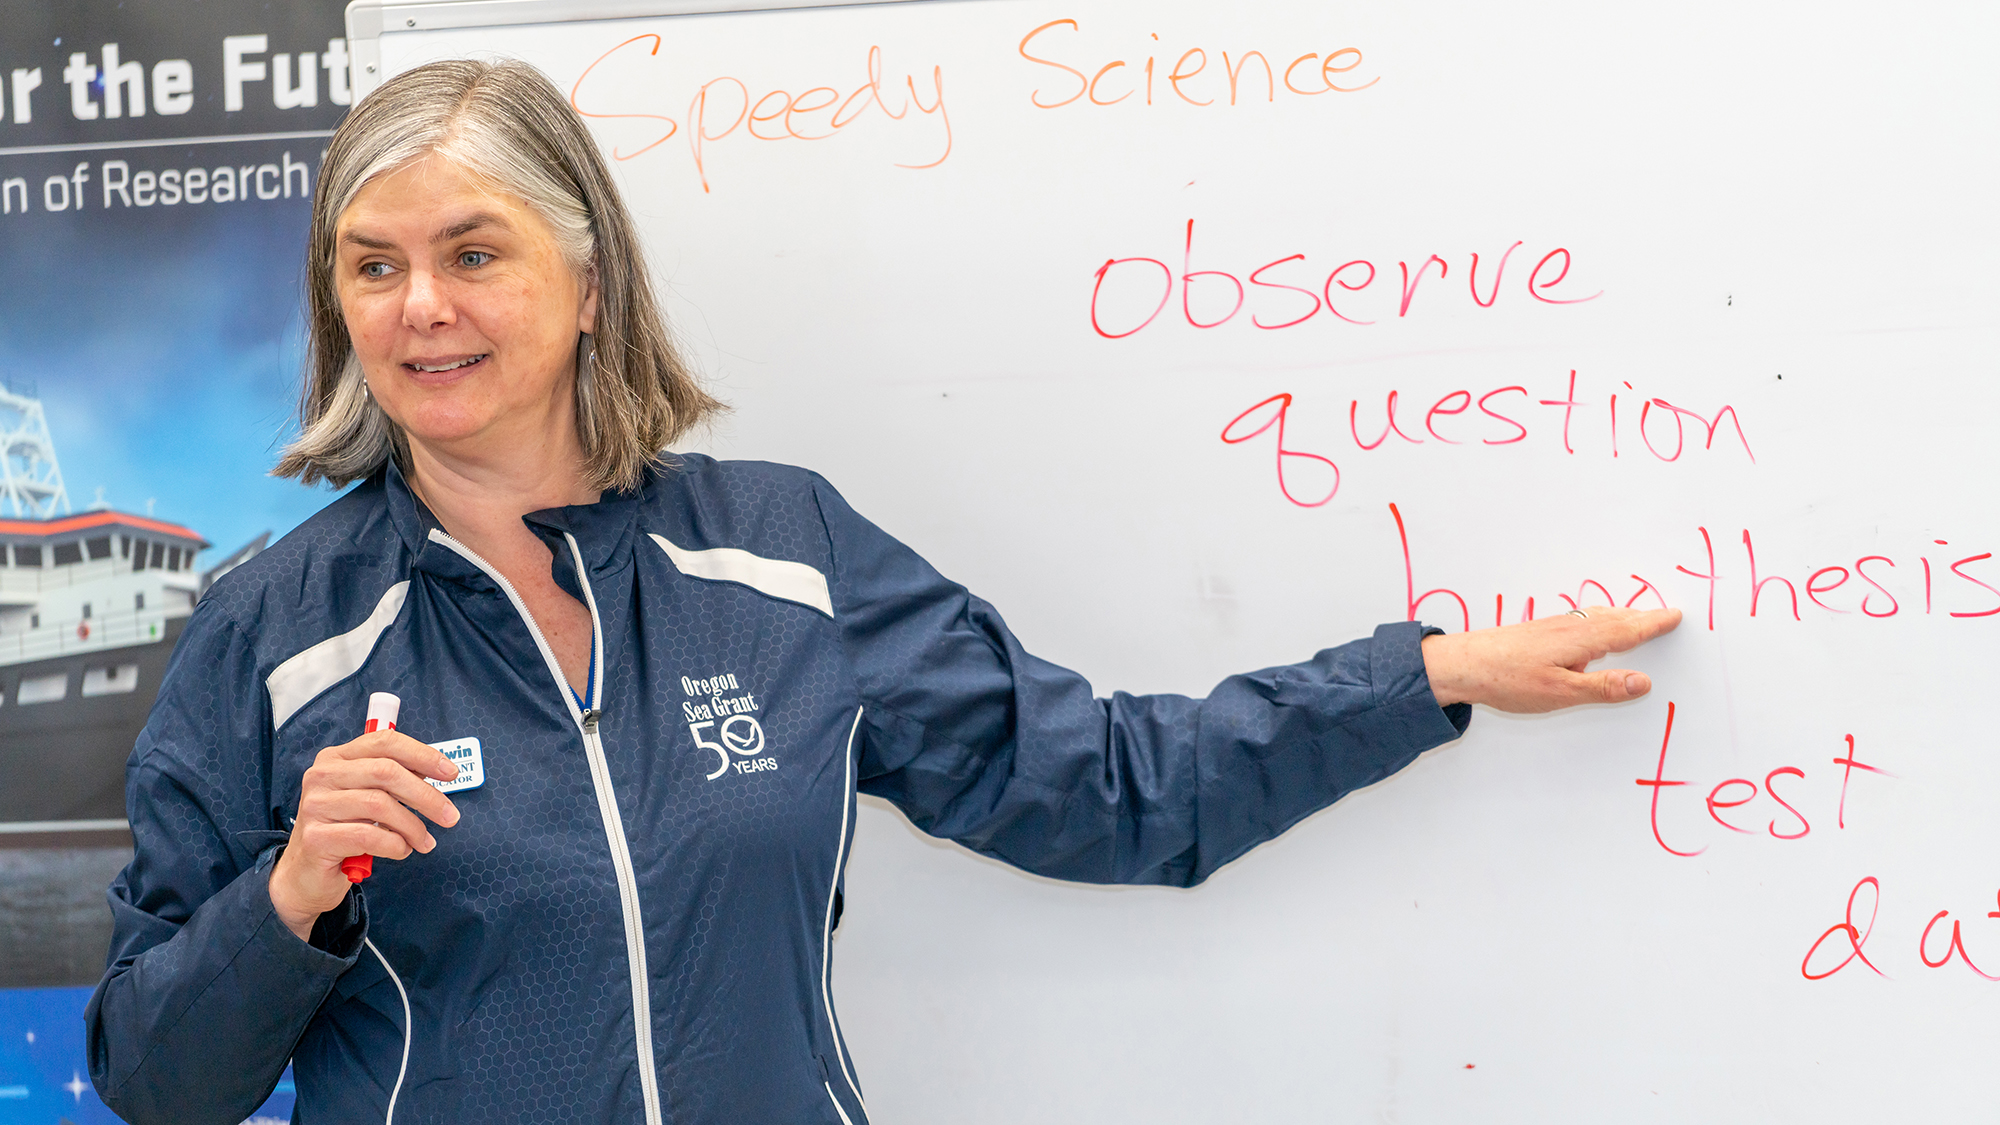 Woman with Sea Grant jacket on pointing to whiteboard